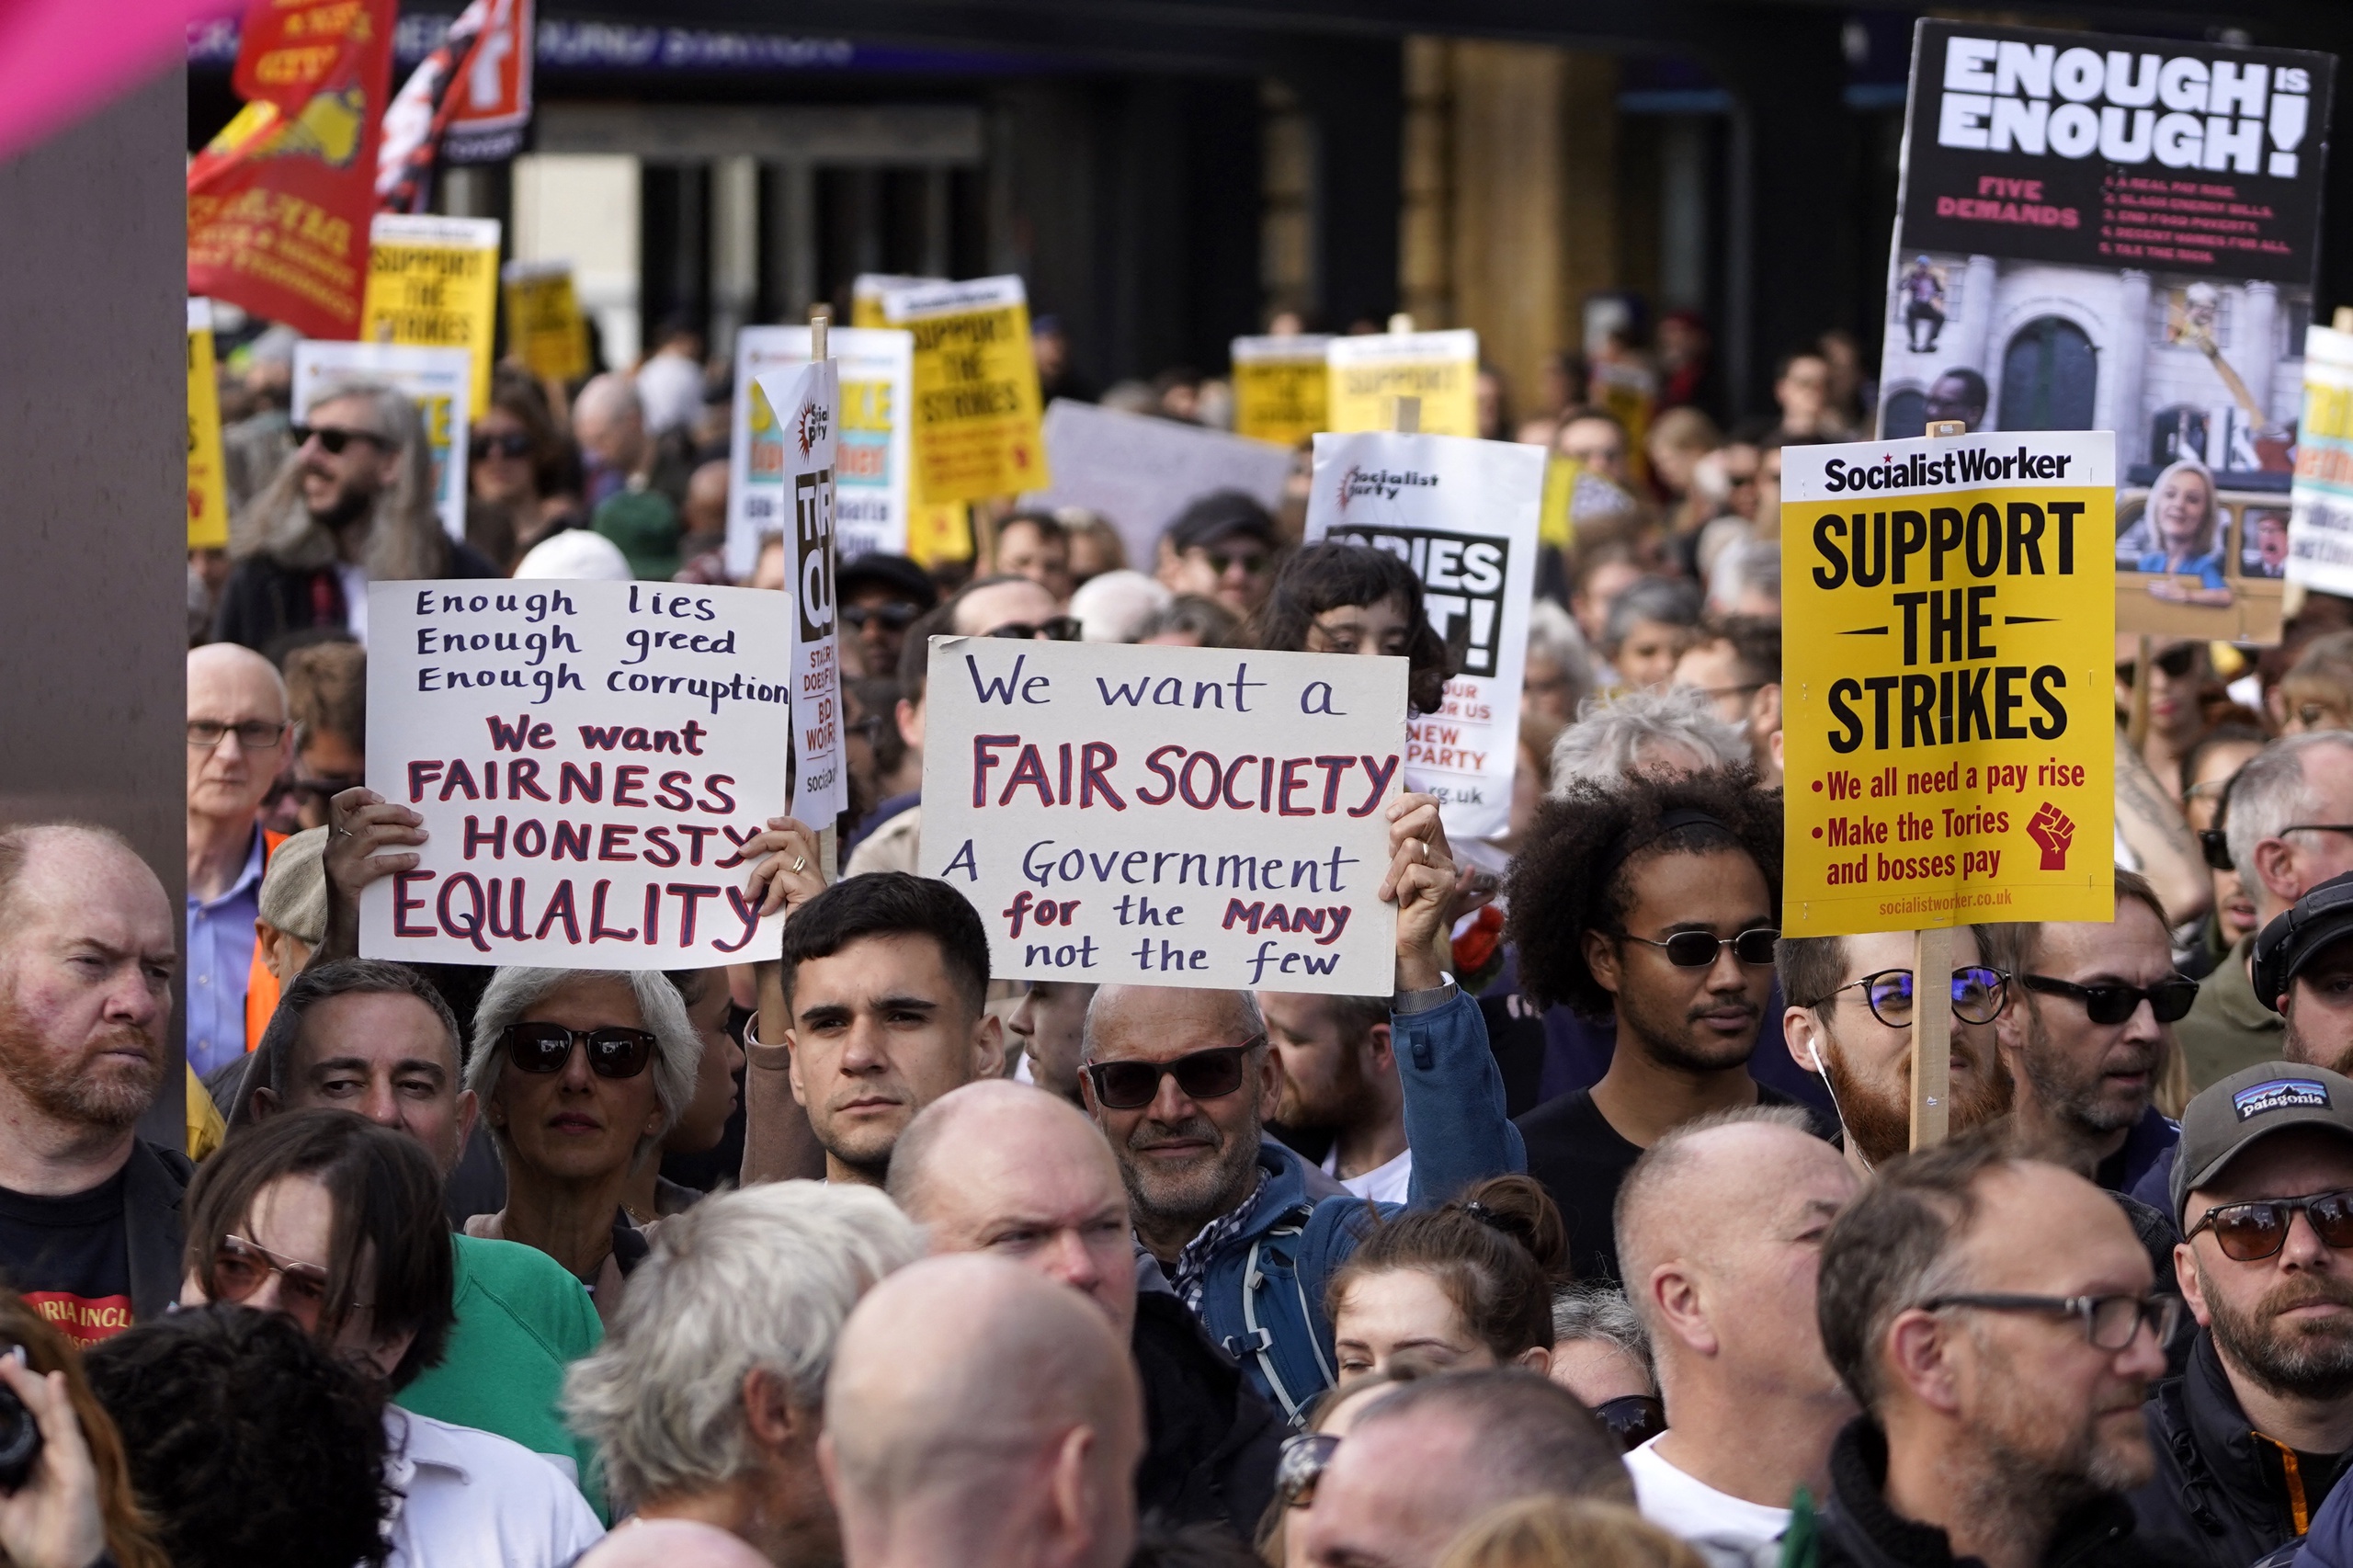 The demonstration in London was organized by Enough is Enough.  This action group was formed by unions and social organizations in protest against rising costs of living, low wages, wealth inequality, and housing shortages. 